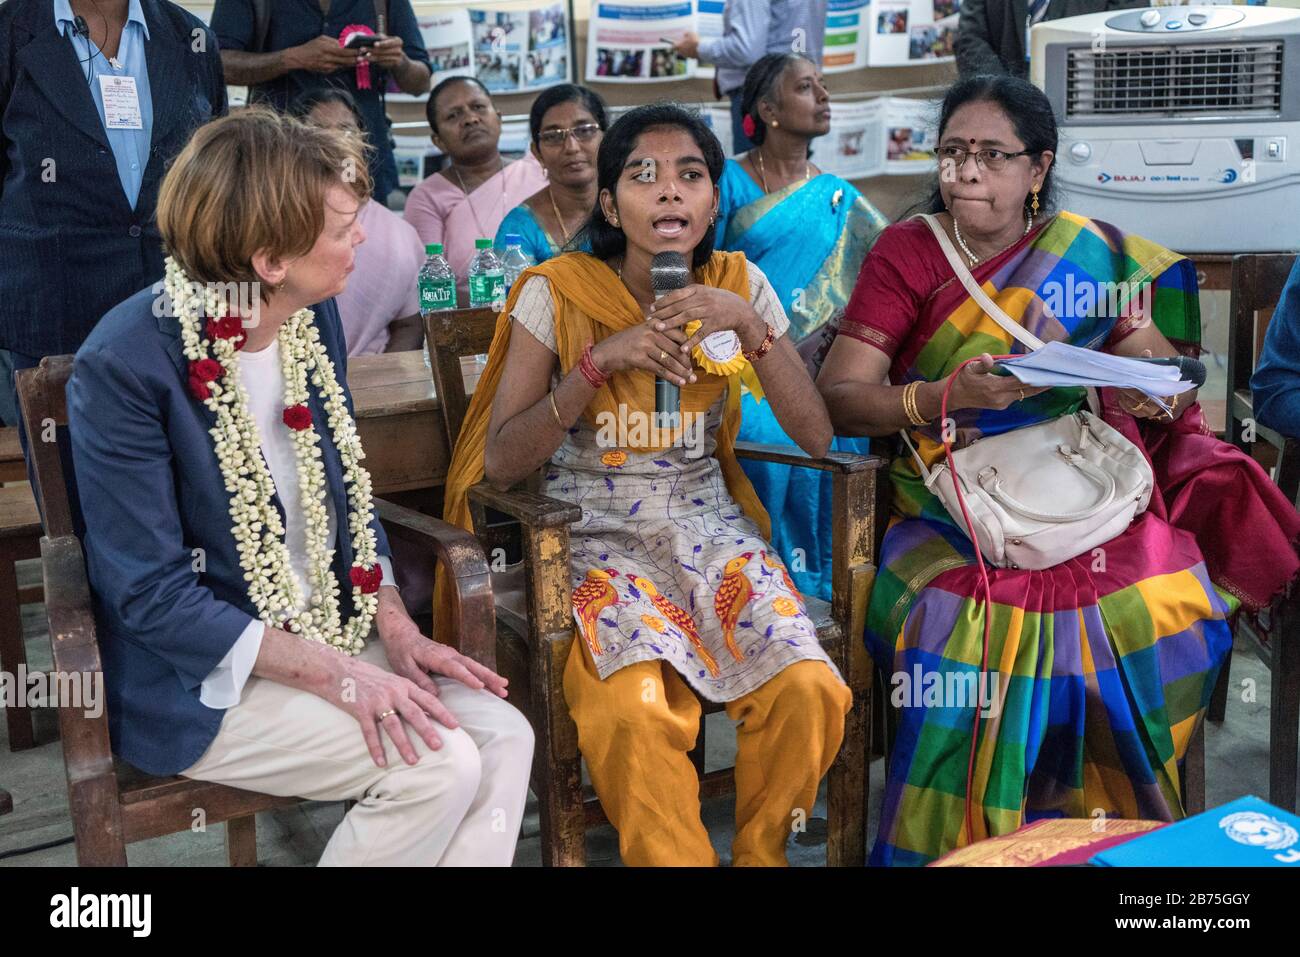 India, Chennai, 25.03.2018. Trip of the German President and Mrs. Buedenbender to the Republic of India from 21-26.03.2018. Mrs. Buedenbender visits the Unicef project 'Arunodhaya Centre for Street and Working Children' on 25.03.2018. From left to right: Elke Buedenbender, lawyer and wife of the German President, girl (CASC Member), Virgil D'Sami, representative of Unicef India. [automated translation] Stock Photo